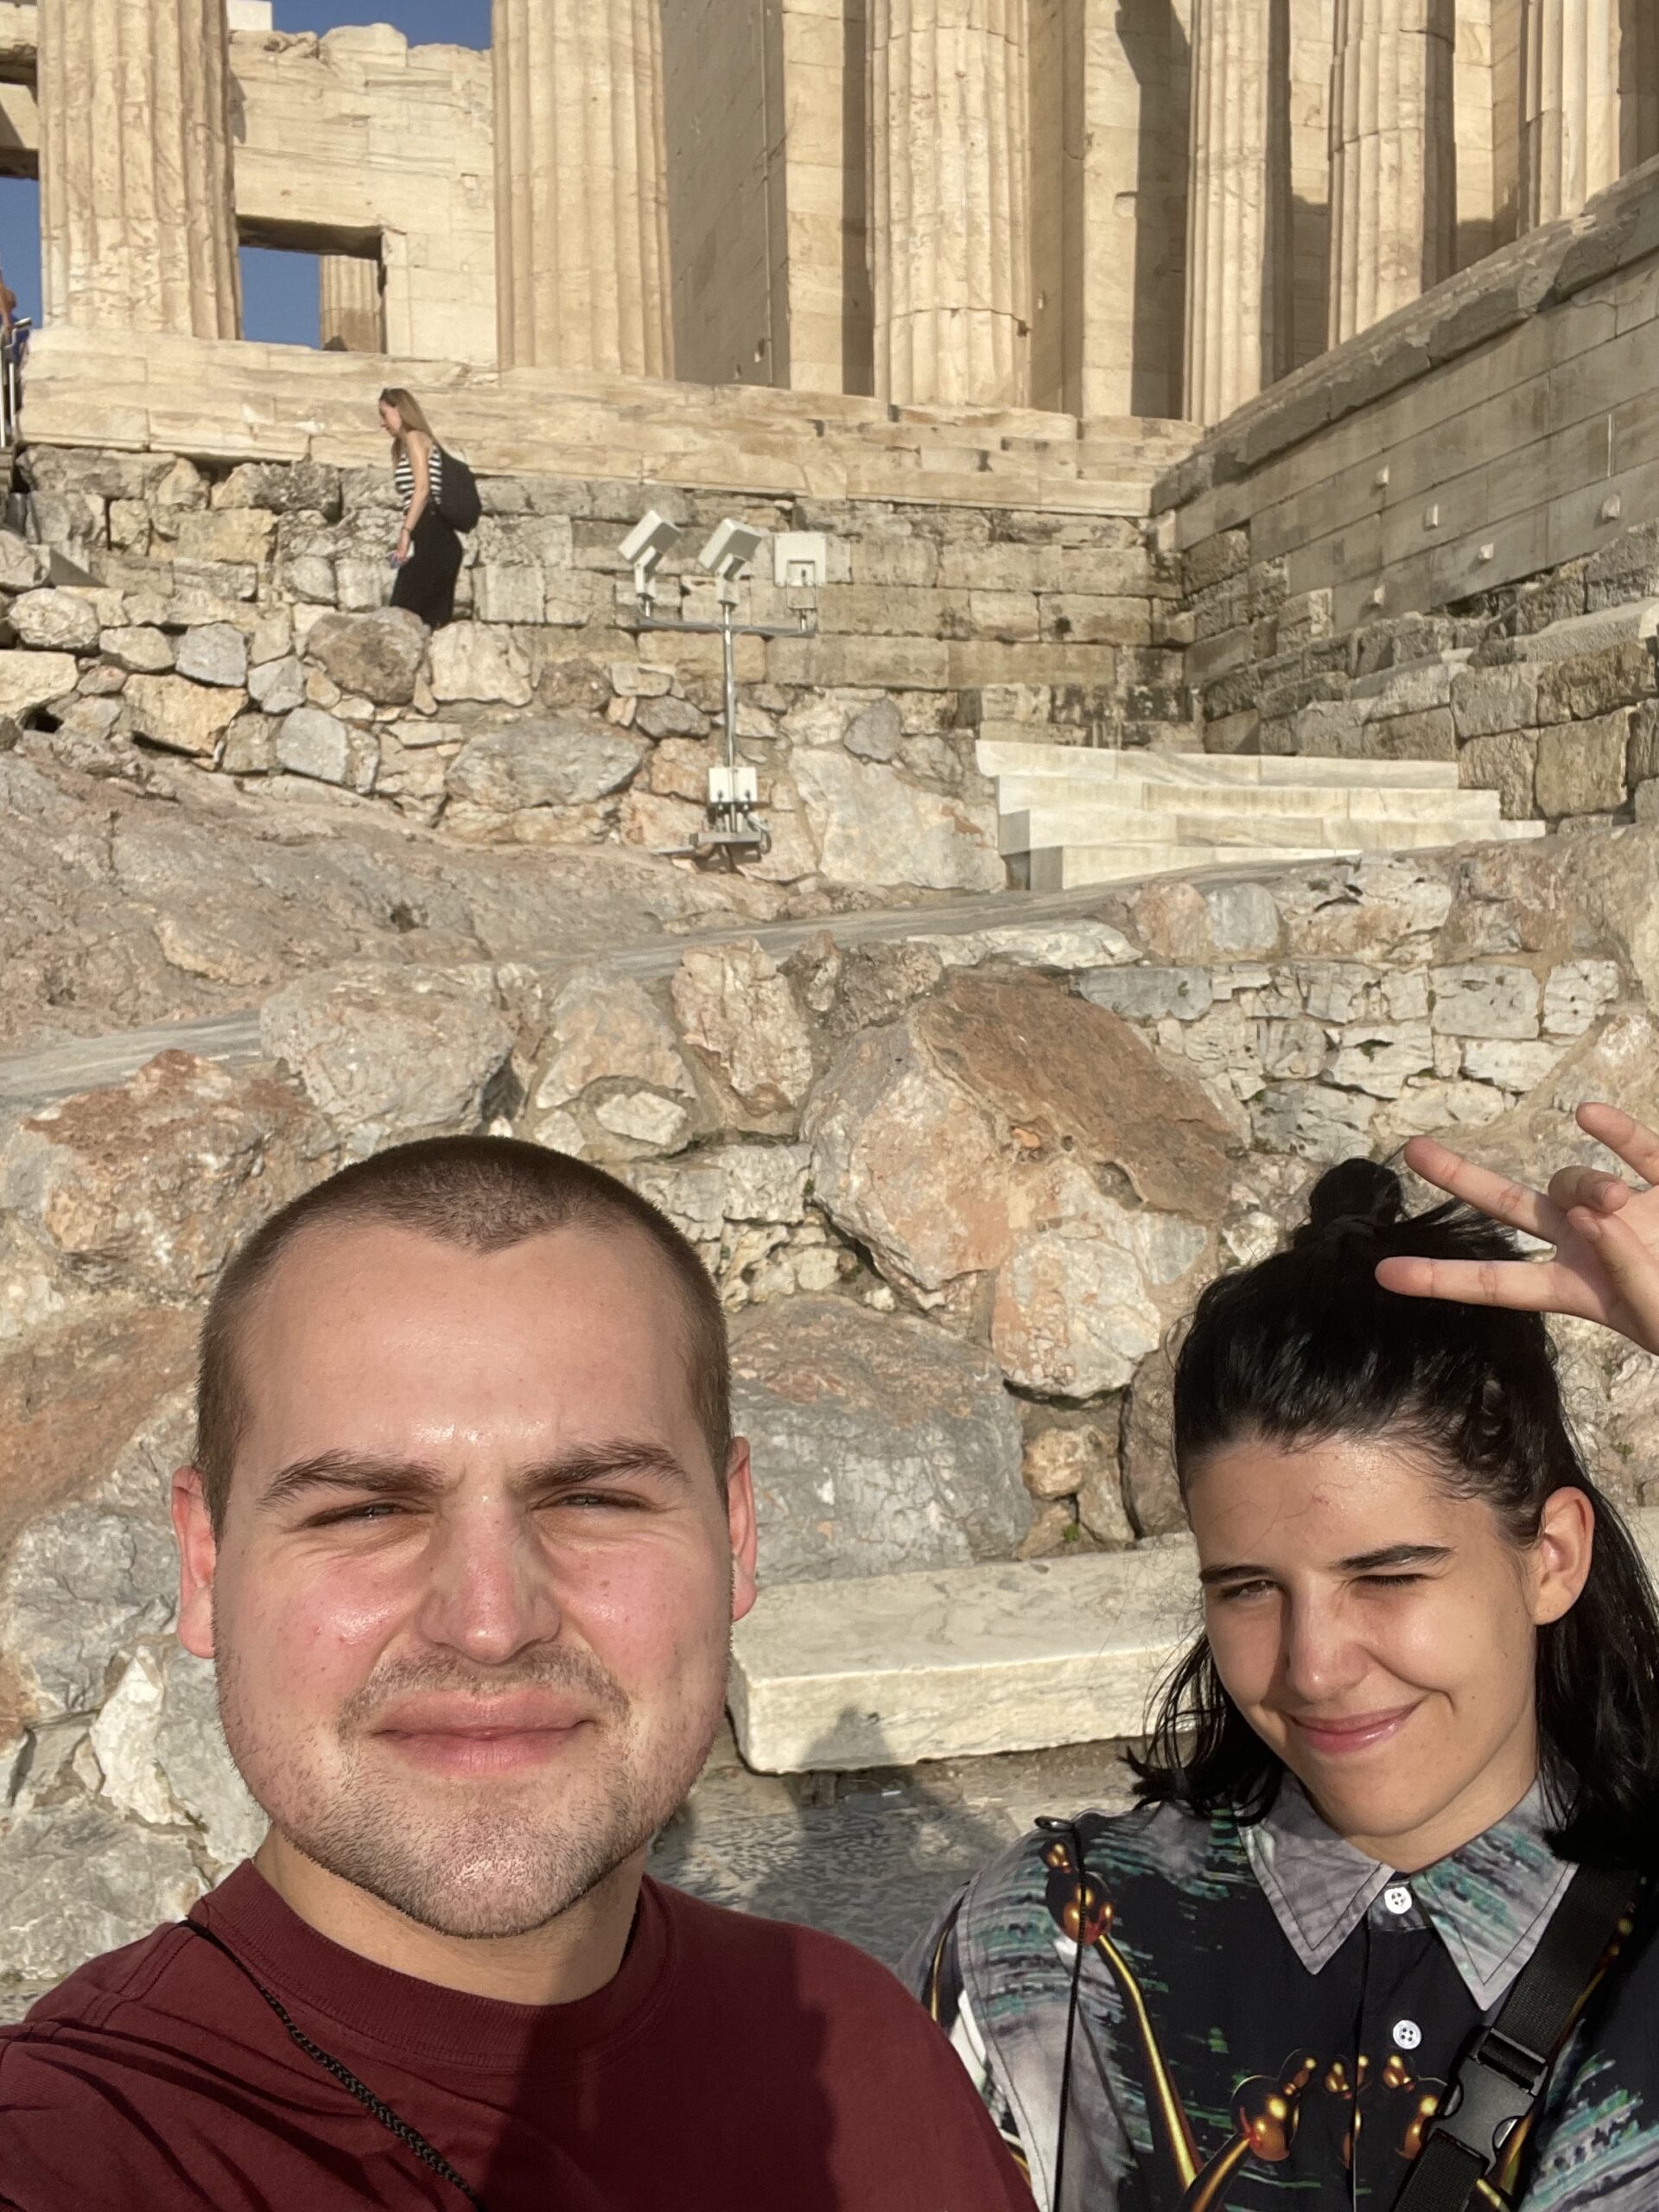 Rhys with a friend at the Acropolis in Athens (Photo Credit: Rhys Bellamy)